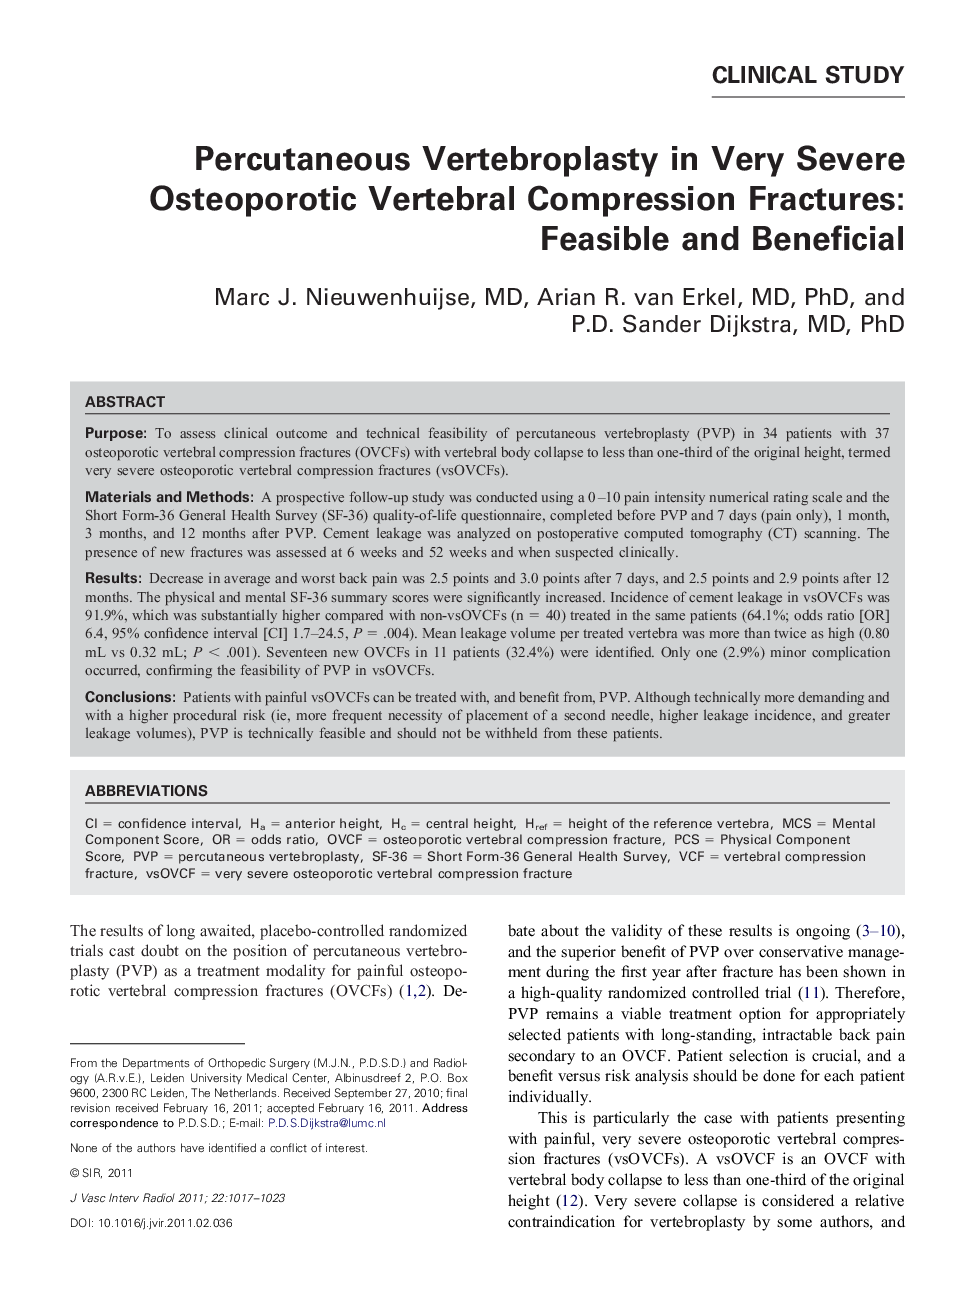 Percutaneous Vertebroplasty in Very Severe Osteoporotic Vertebral Compression Fractures: Feasible and Beneficial